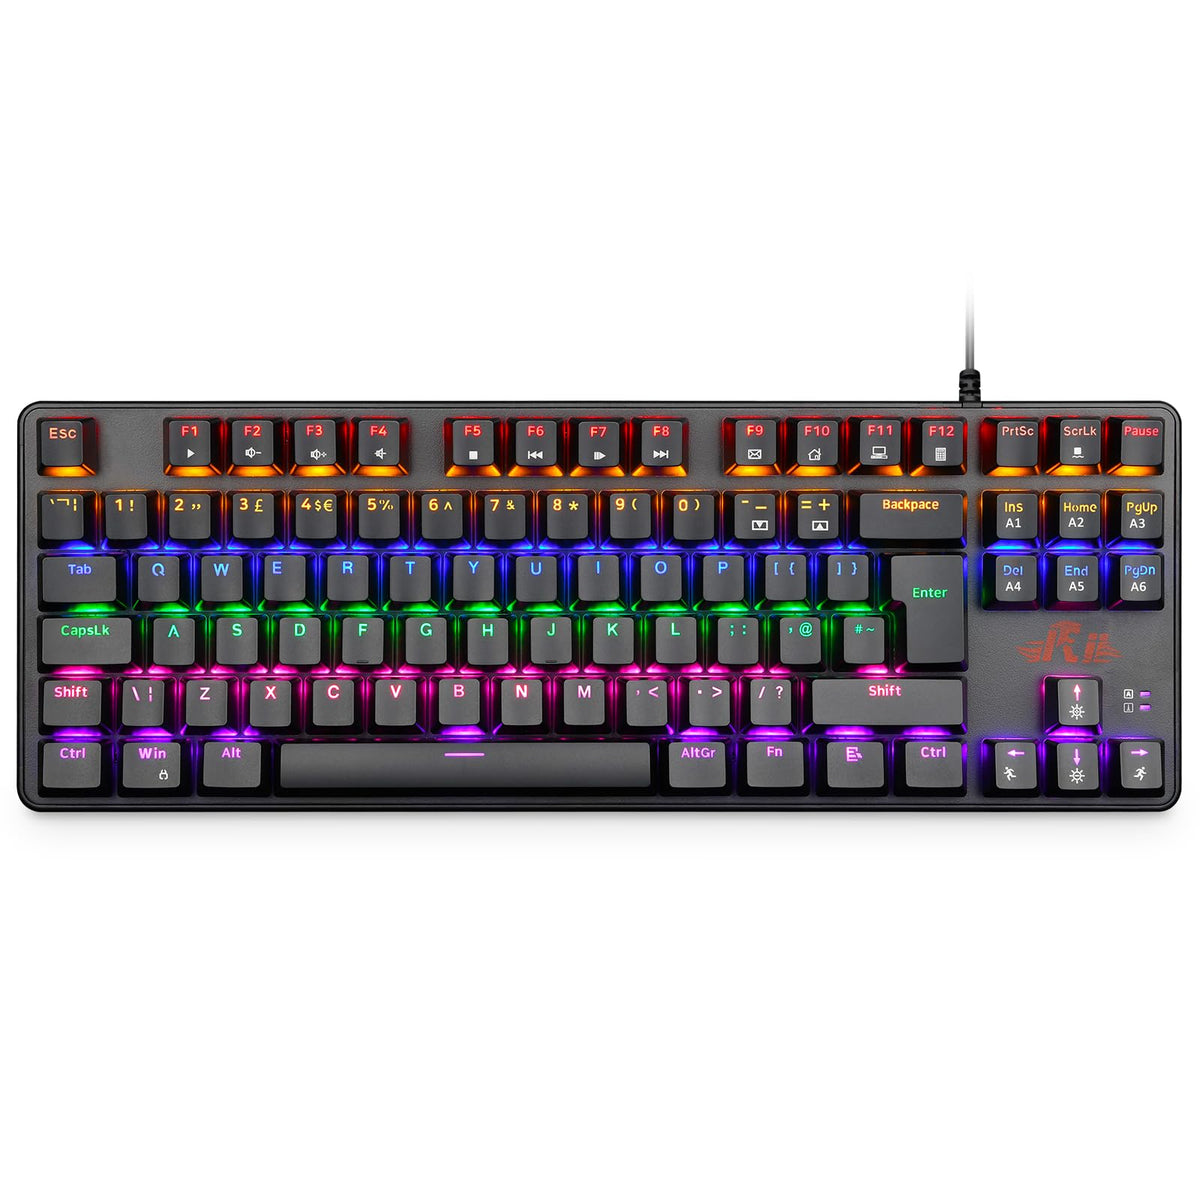 Rii Mechanical Gaming keyboard, RK908 60% Mechanical Keyboard(9 Backlight Modes) Blue Switches with 7 Color 88 Keys for PC Windows Mac keyboard-UK Layout